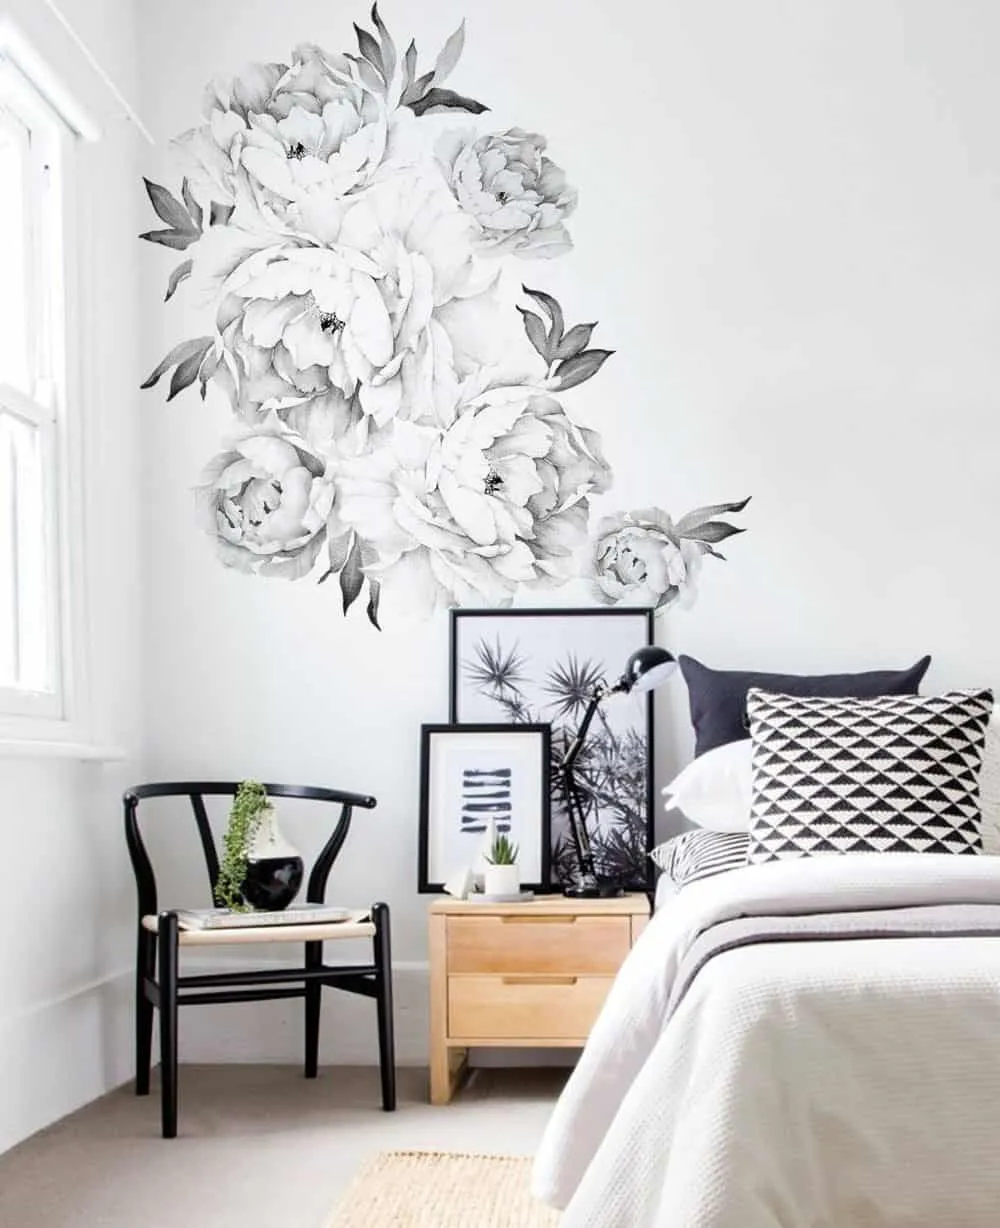 white and black floral 3D hall or bedroom wall sticker in a bed room with wooden furnishing.